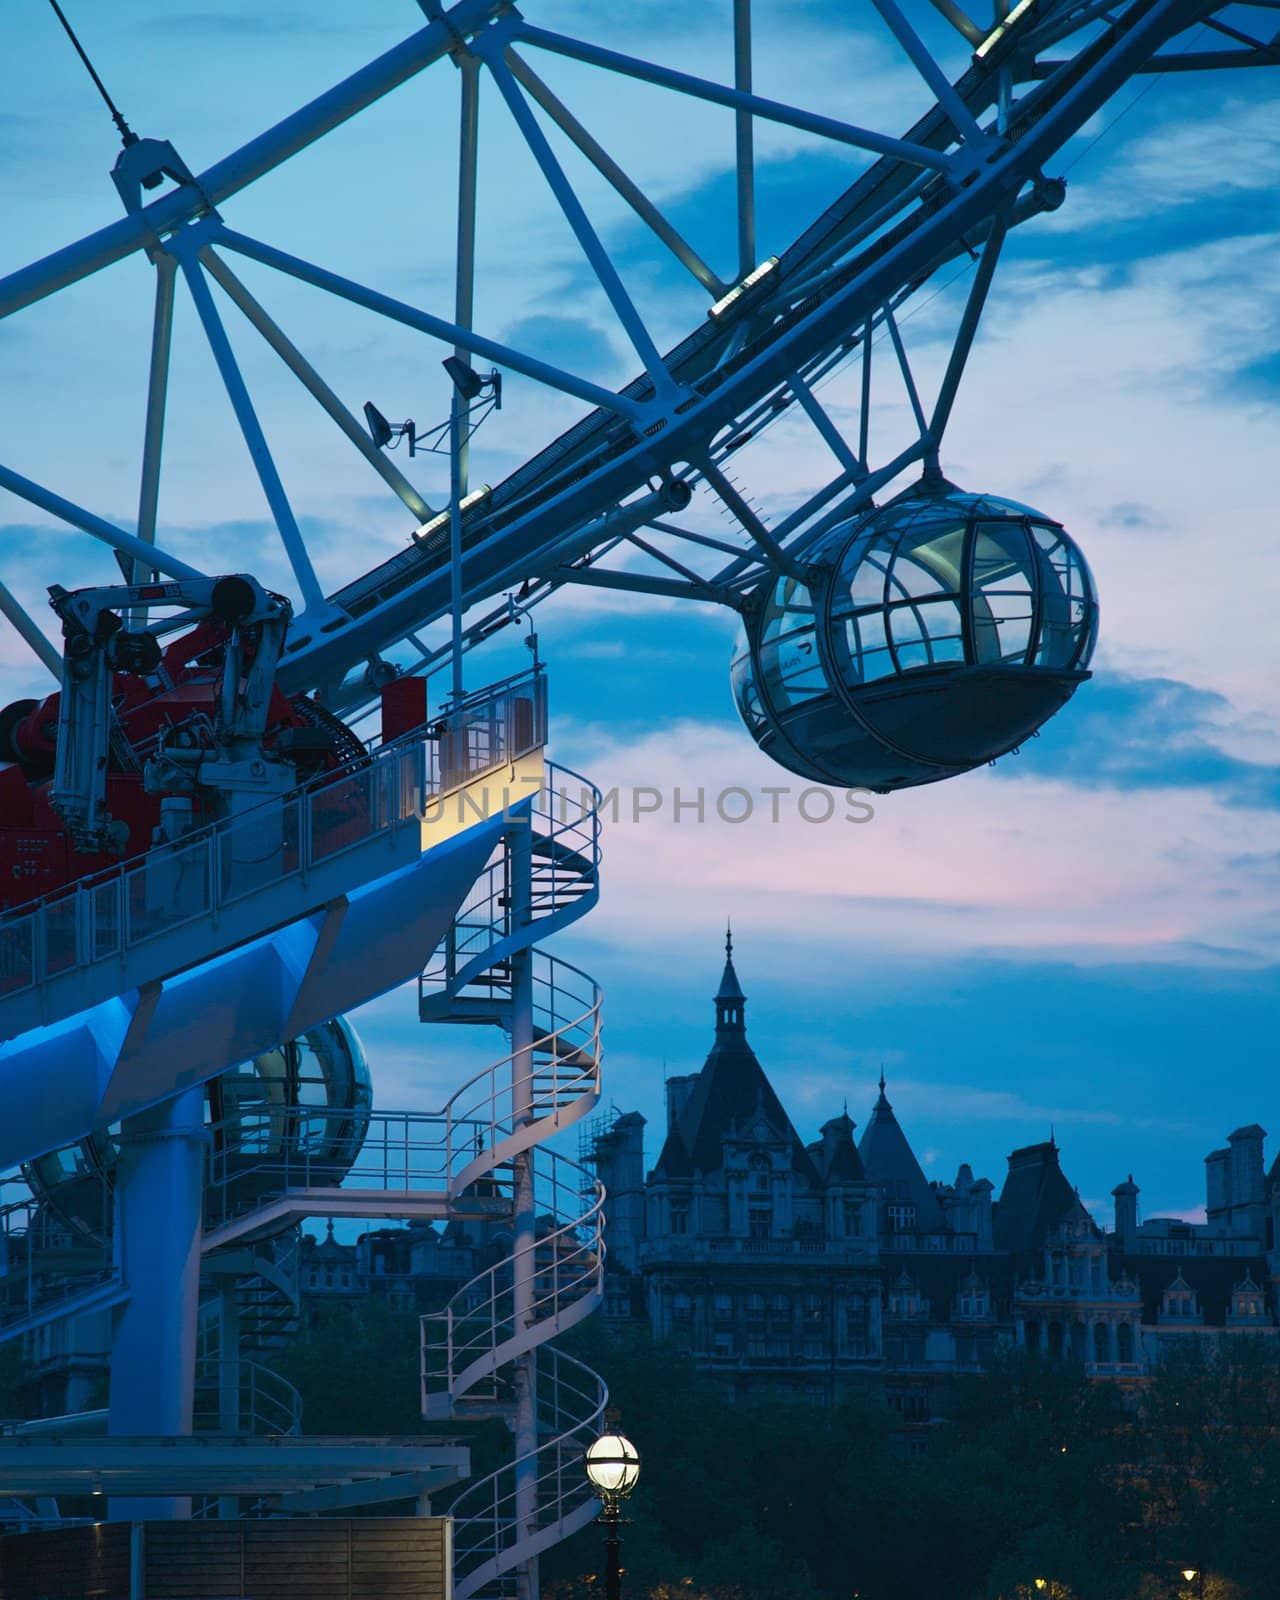 View the London Eye in London city centre and Thames river